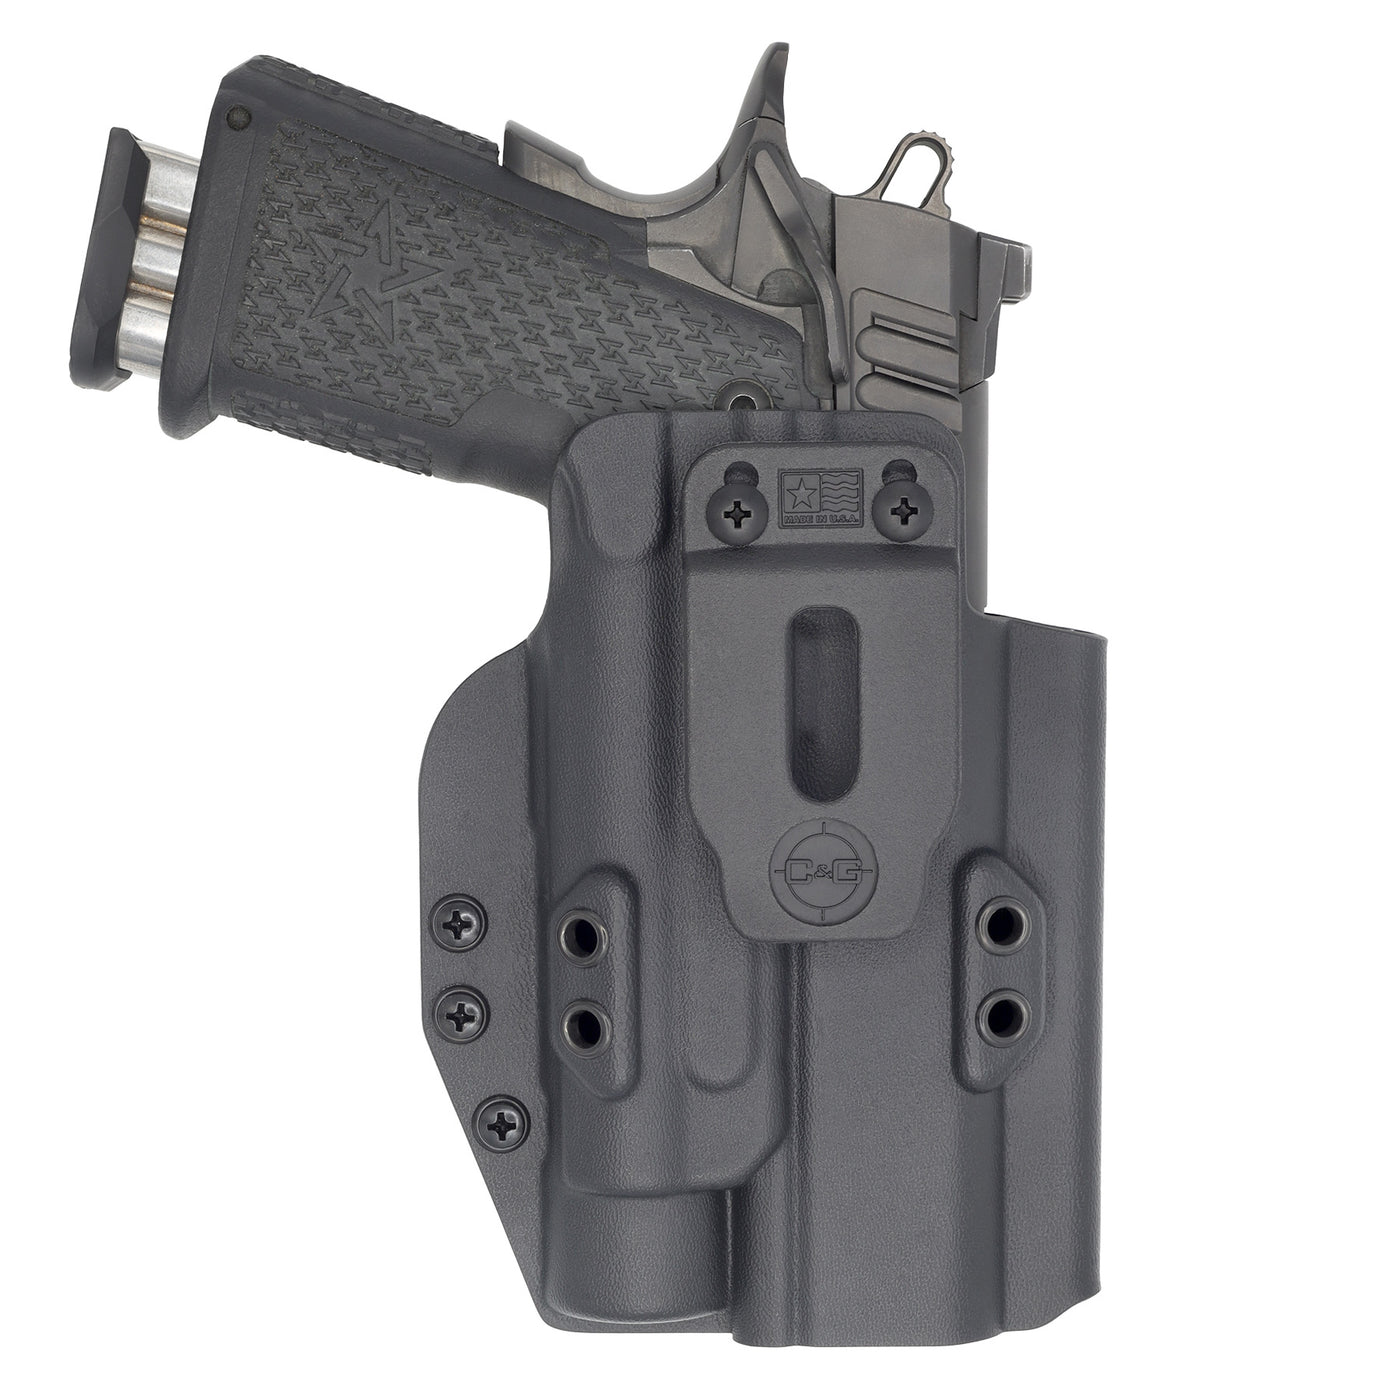 C&G holsters Custom IWB Tactical 1911/2011 Streamlight TLR1 in holstered position